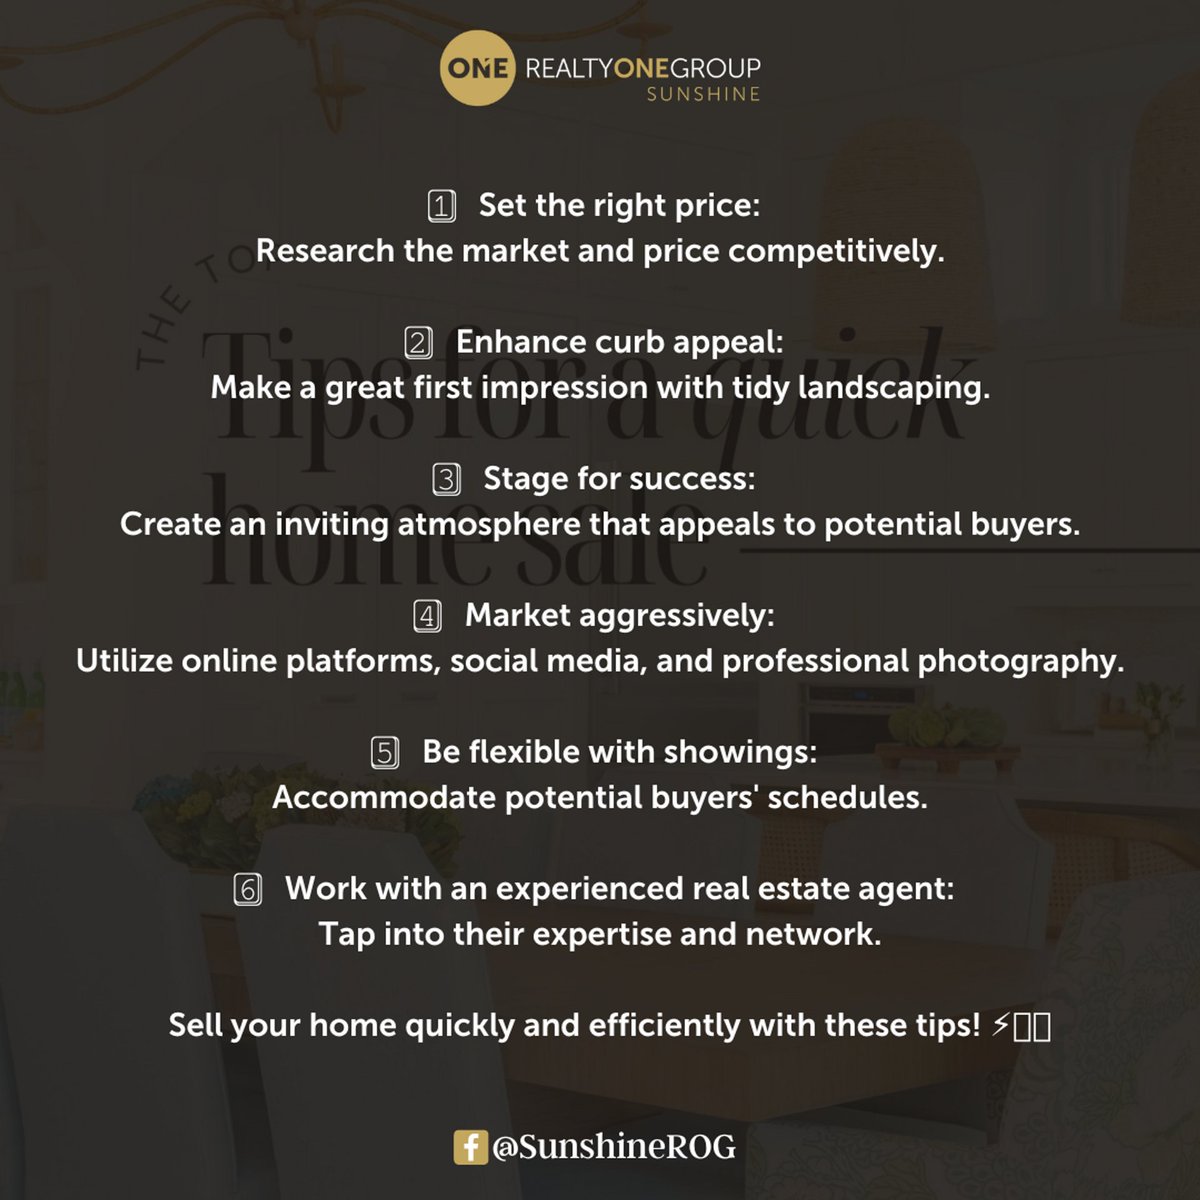 ⚡🏠 Need to sell your home quickly? Follow these tips for a speedy sale! 💨💼

Call us TODAY to be connected to one of our AMAZING agents!
📲 (727) 293-5100

#RealtyONEGroupSunshine #QuickHomeSale #MaximizeYourPotential #SellWithSuccess #Buy